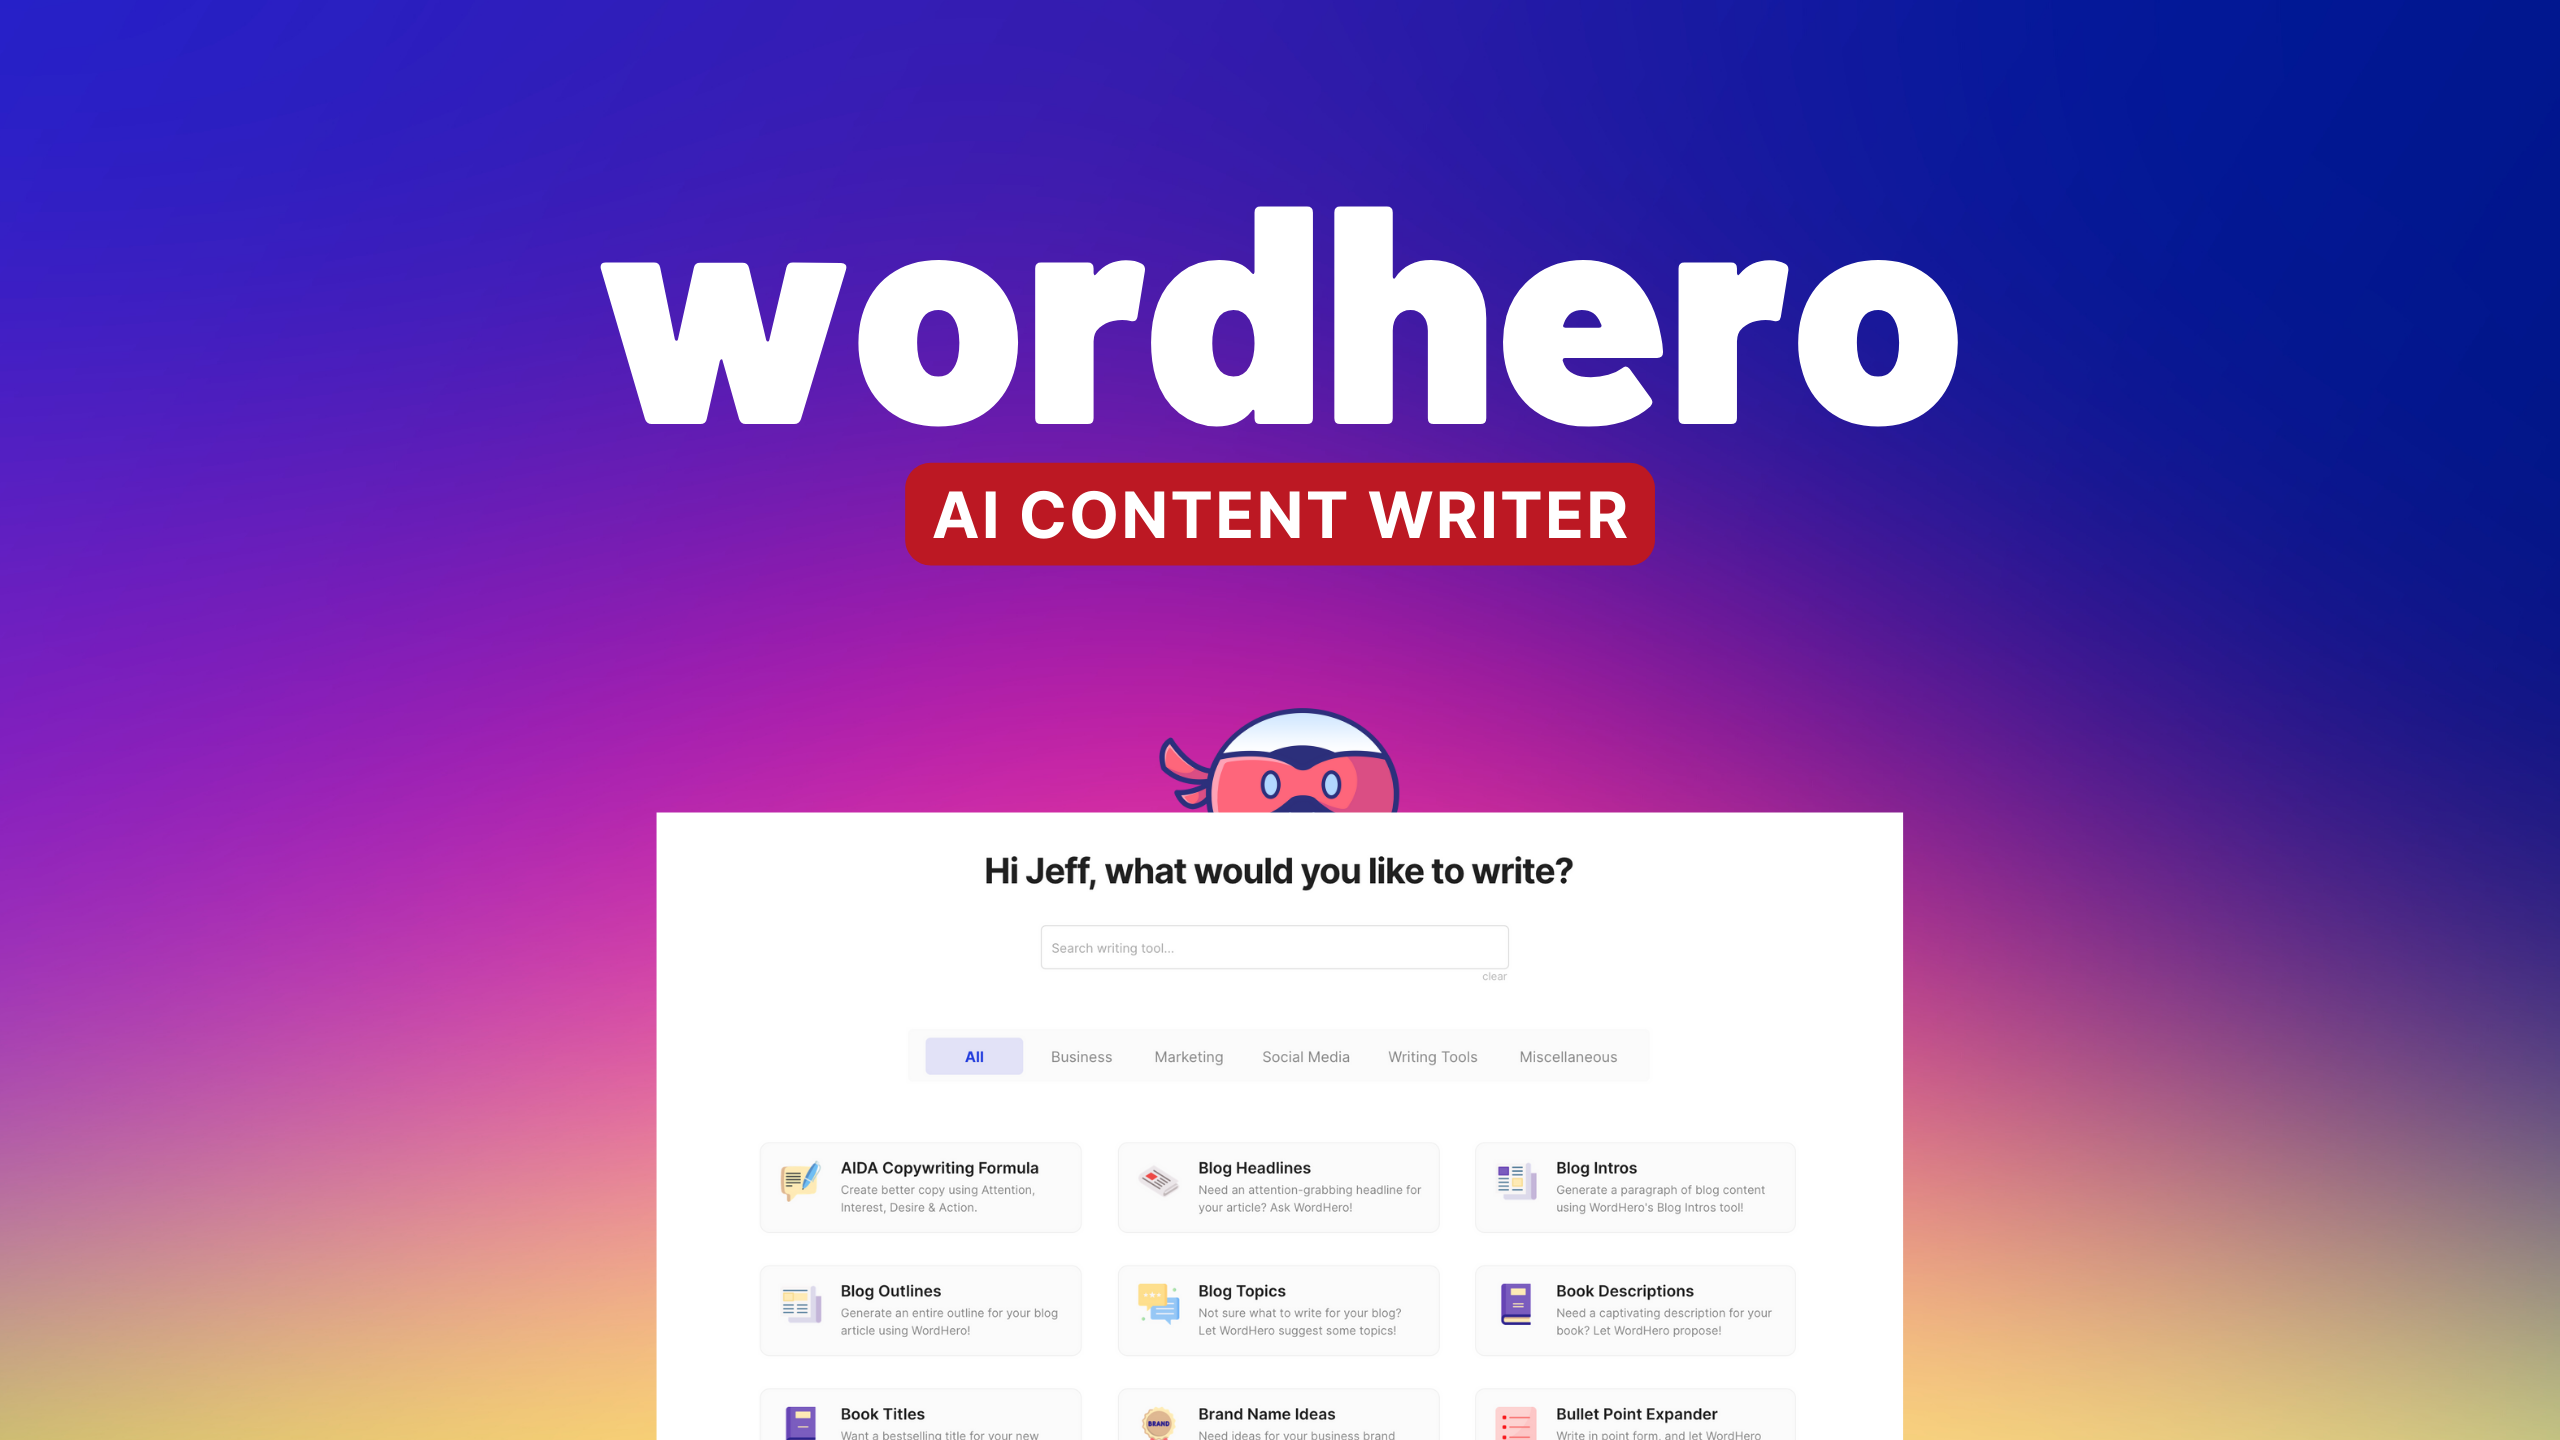 WordHero - AI-powered writing tool that offers 70+ options for generating original content